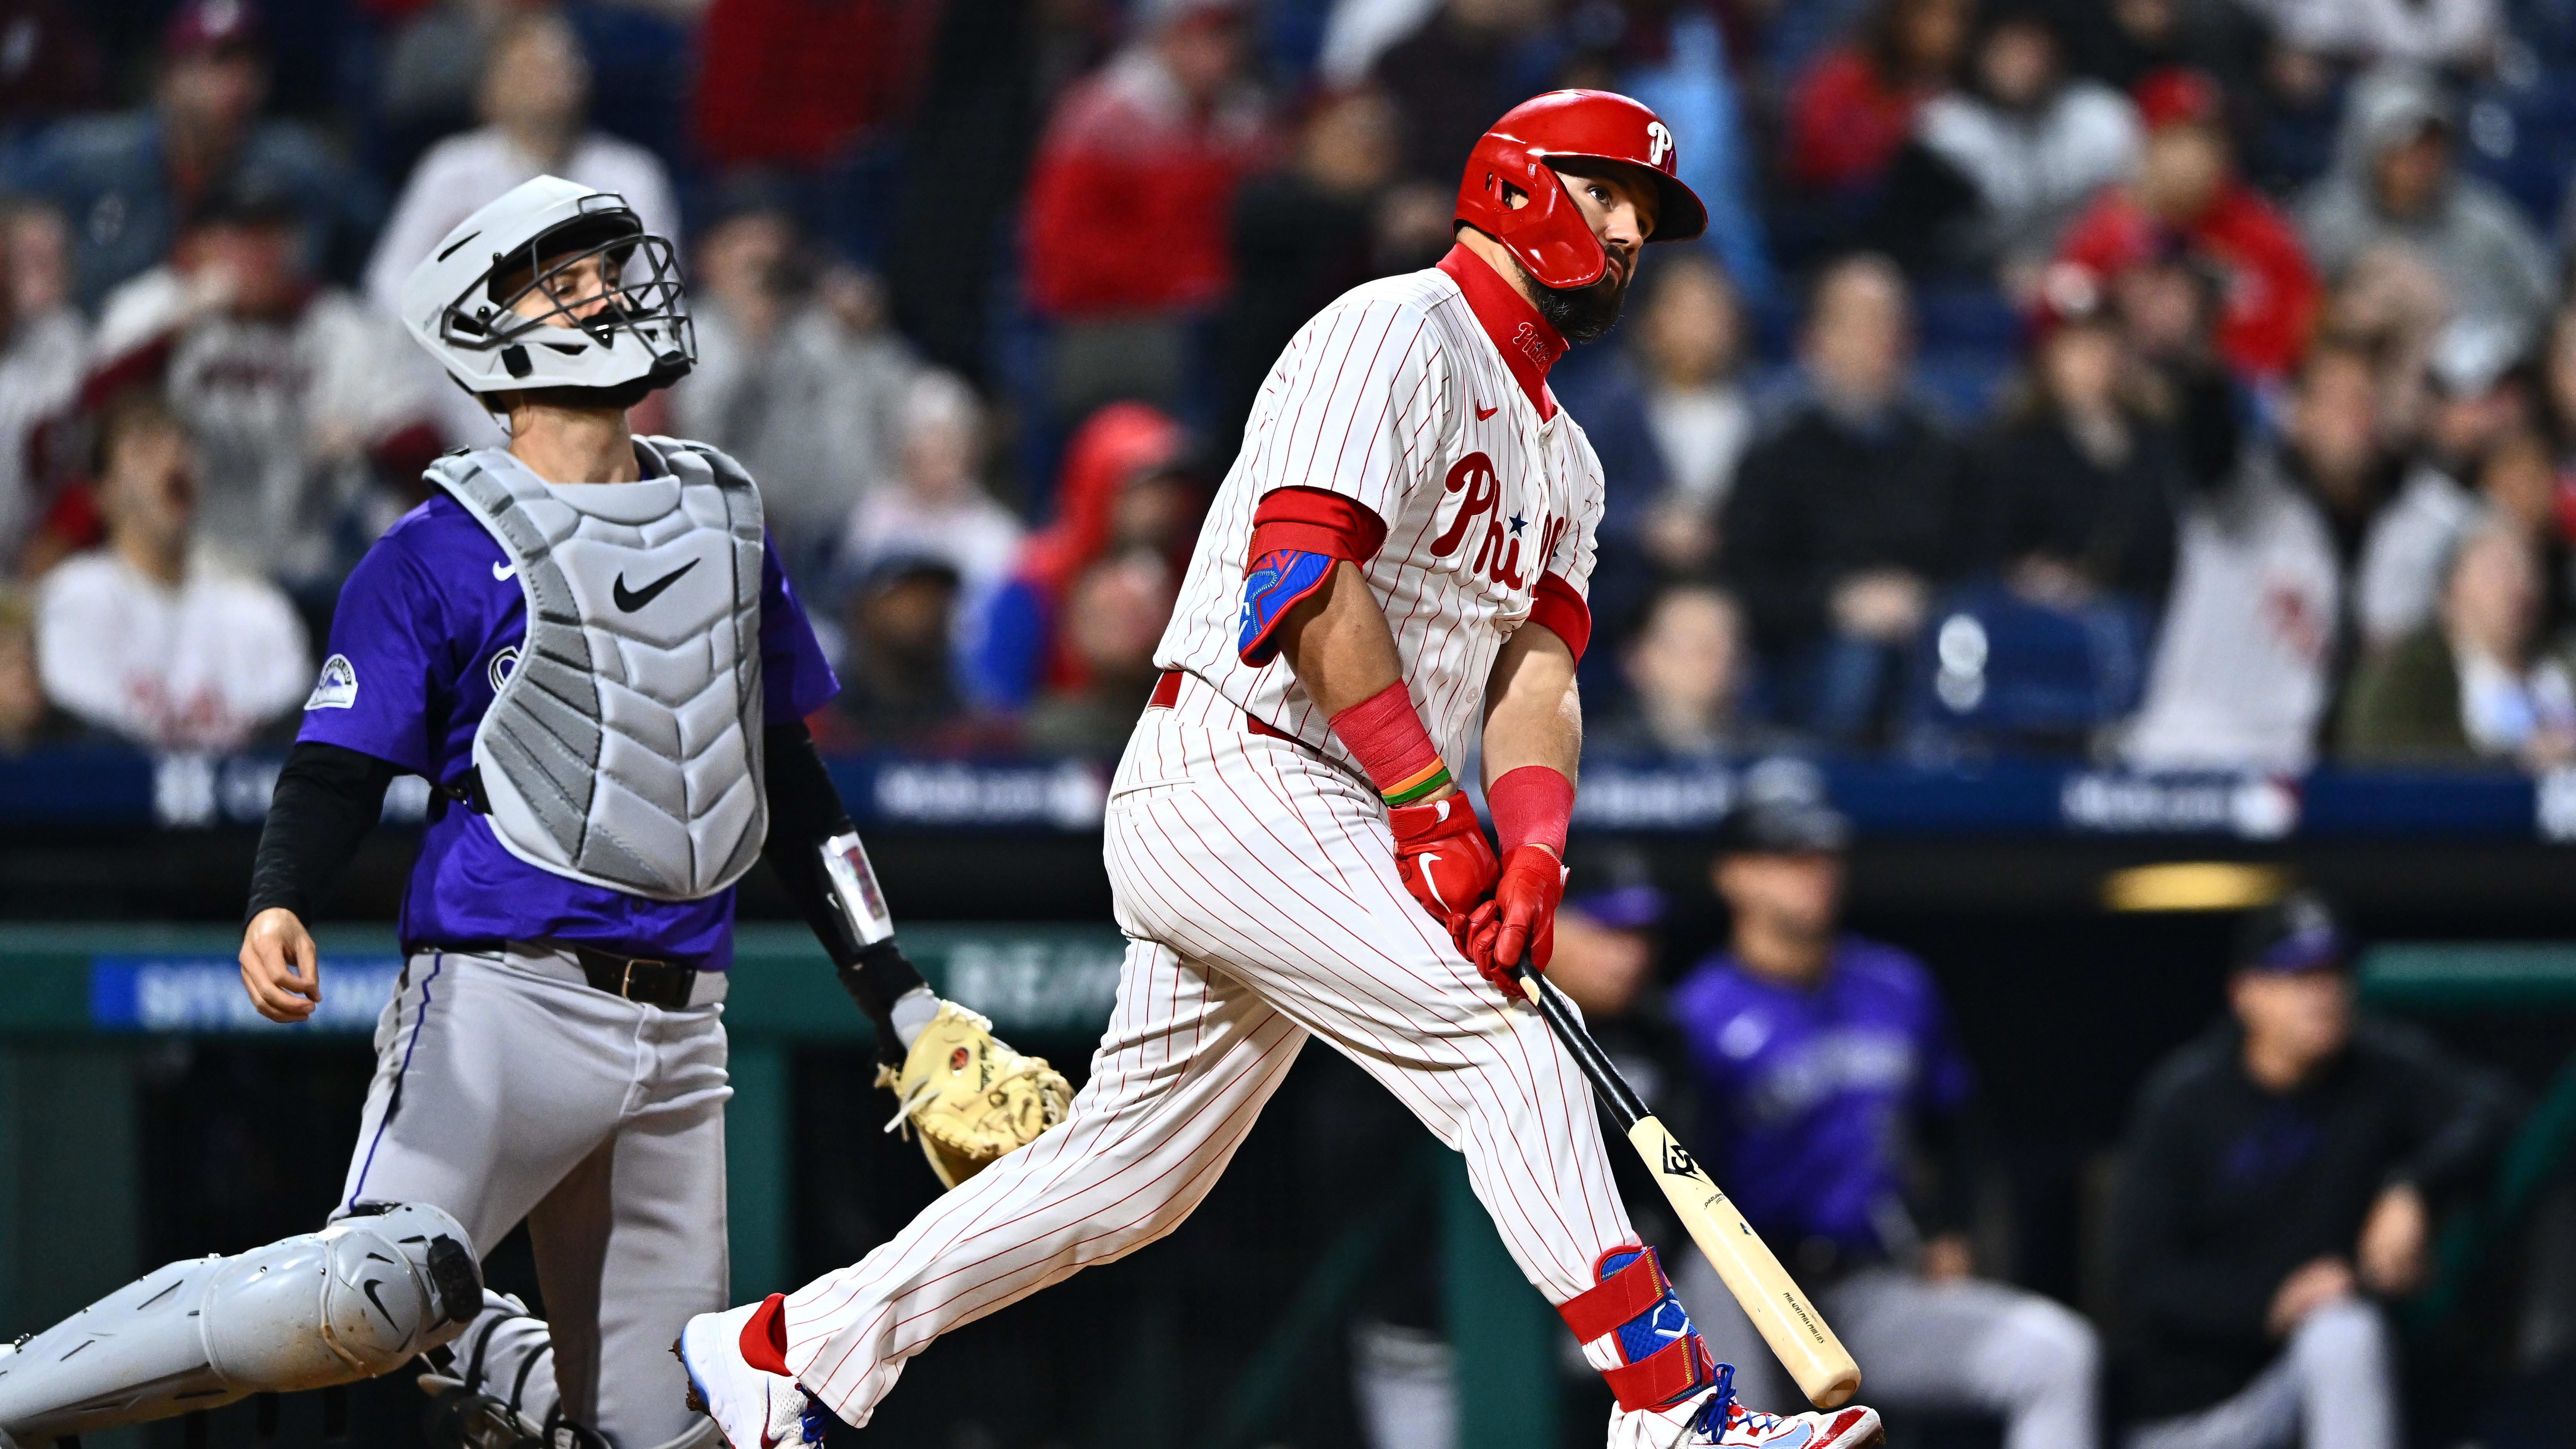 Philadelphia Phillies designated hitter Kyle Schwarber hit two home runs to lift the Phillies to victory over the Colorado Rockies. 